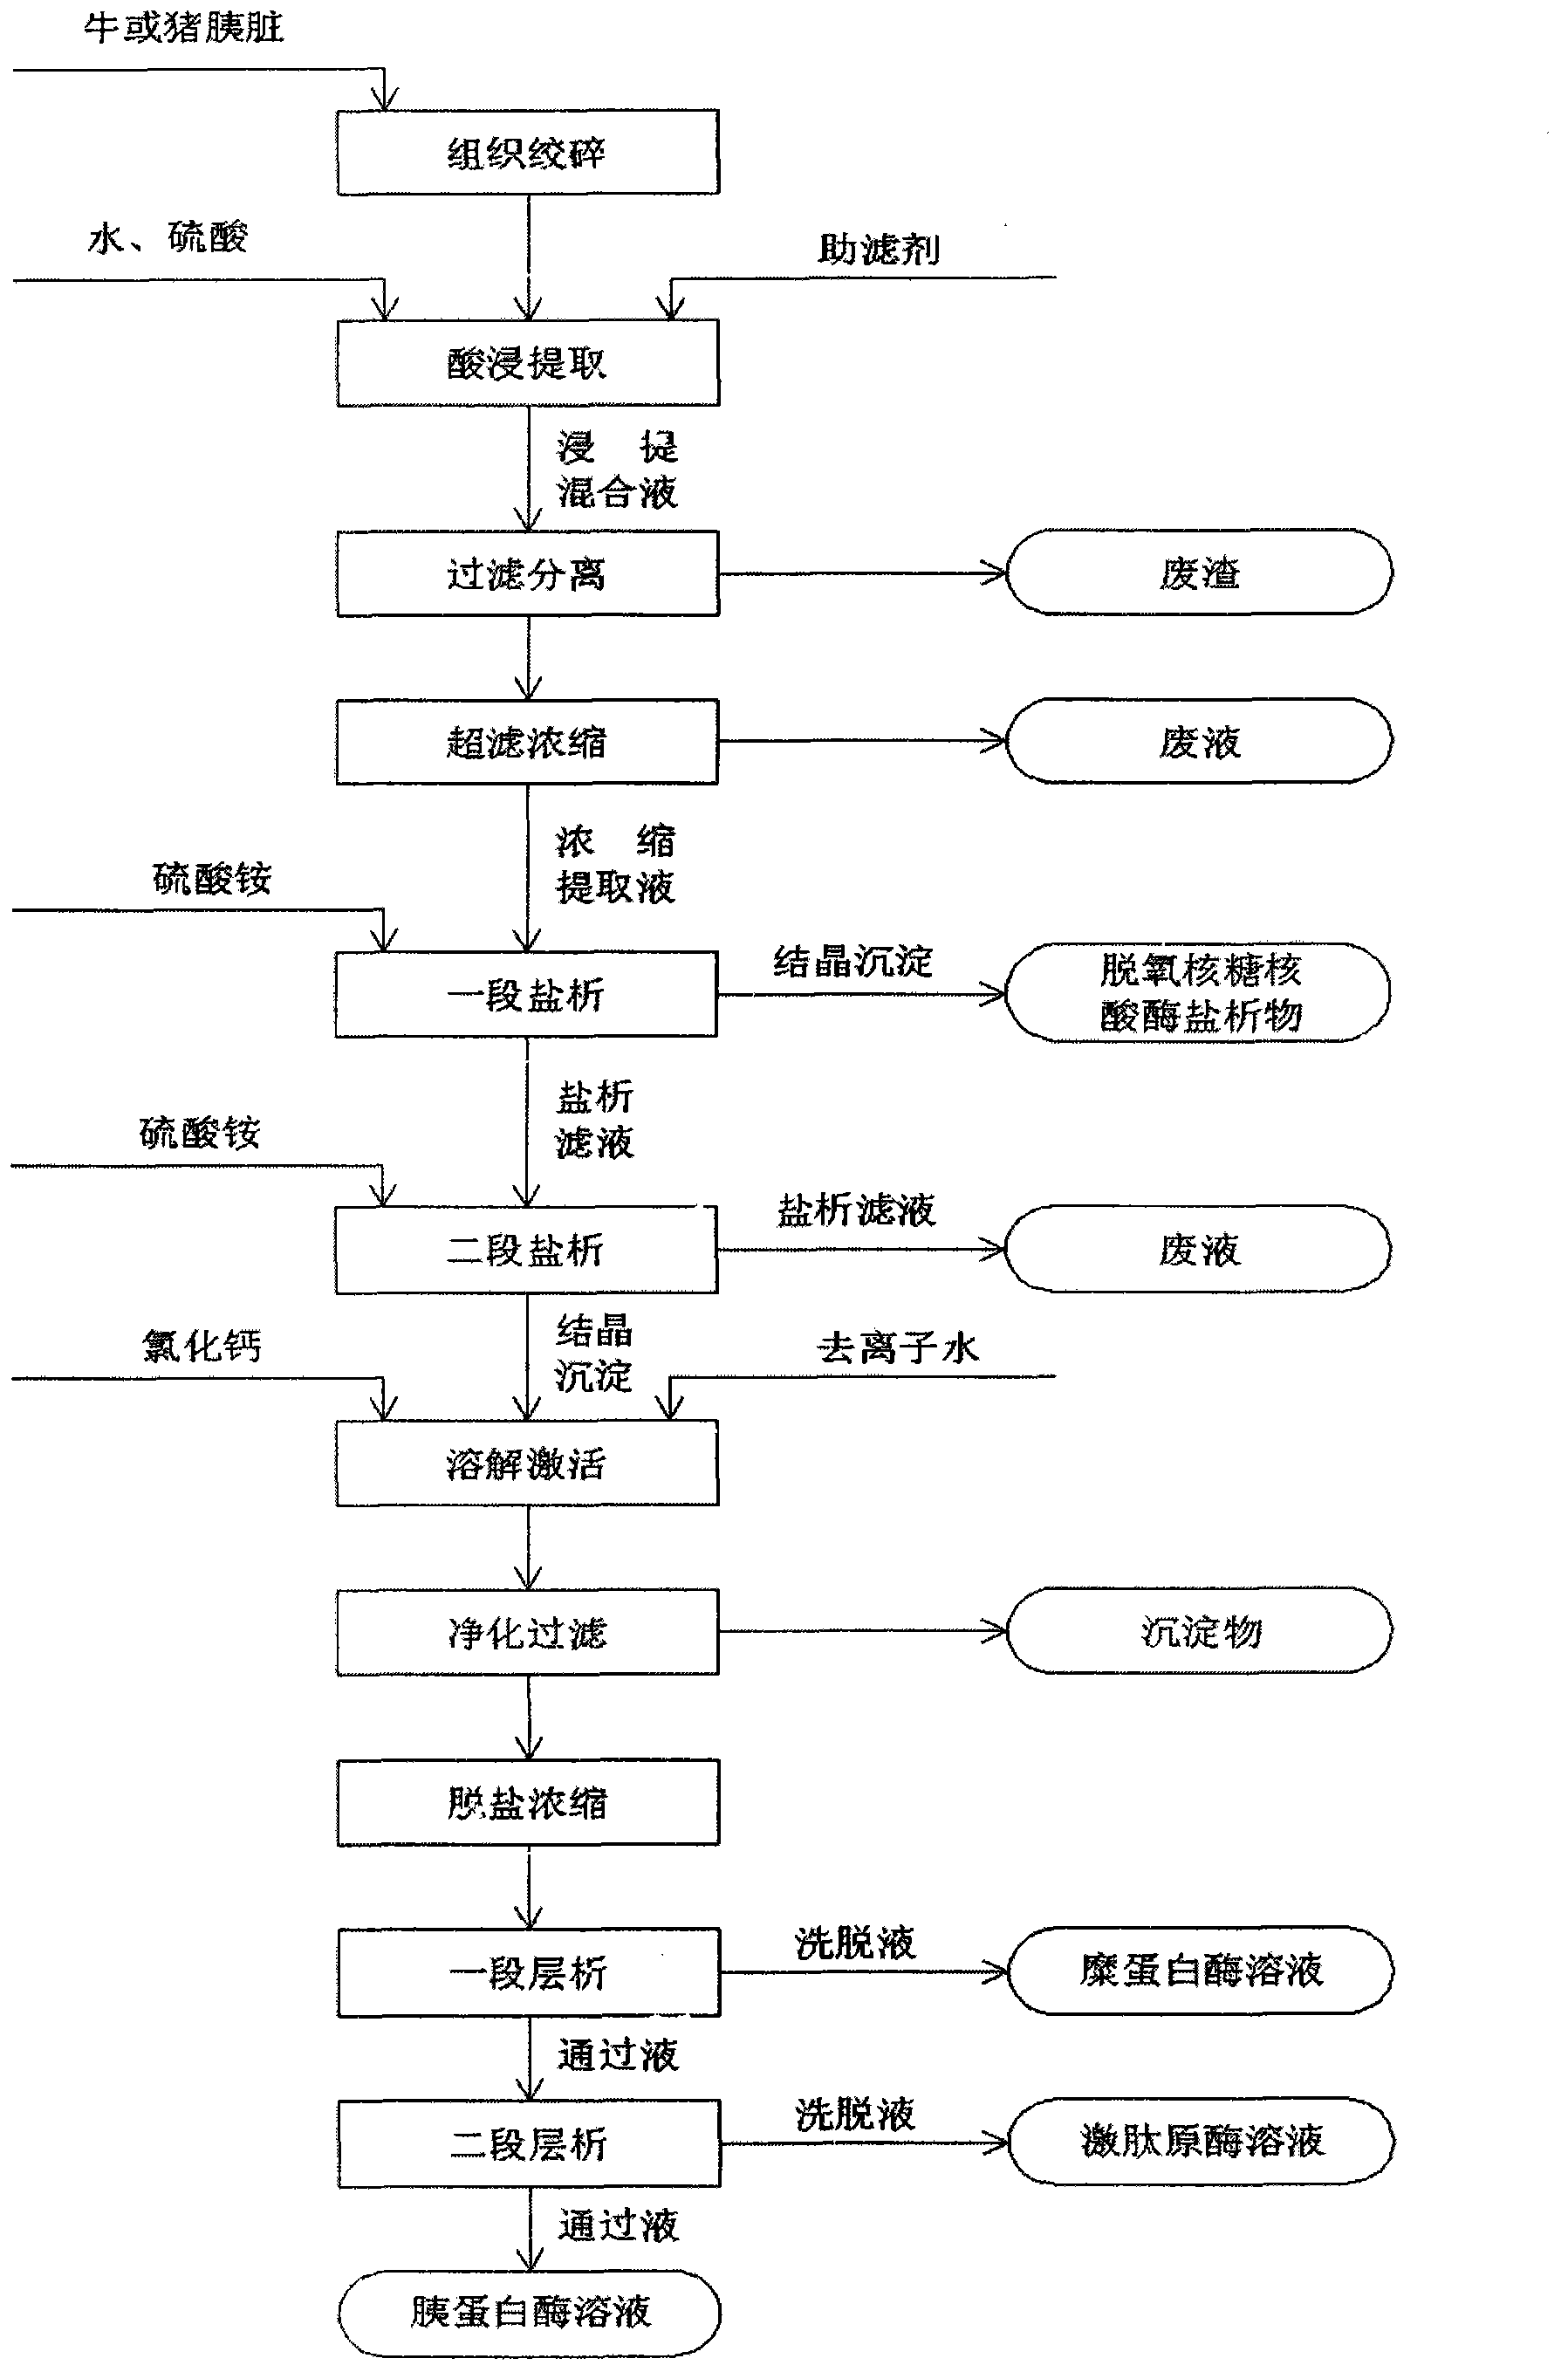 Production process for extracting four enzymes from cattle or pig pancreas